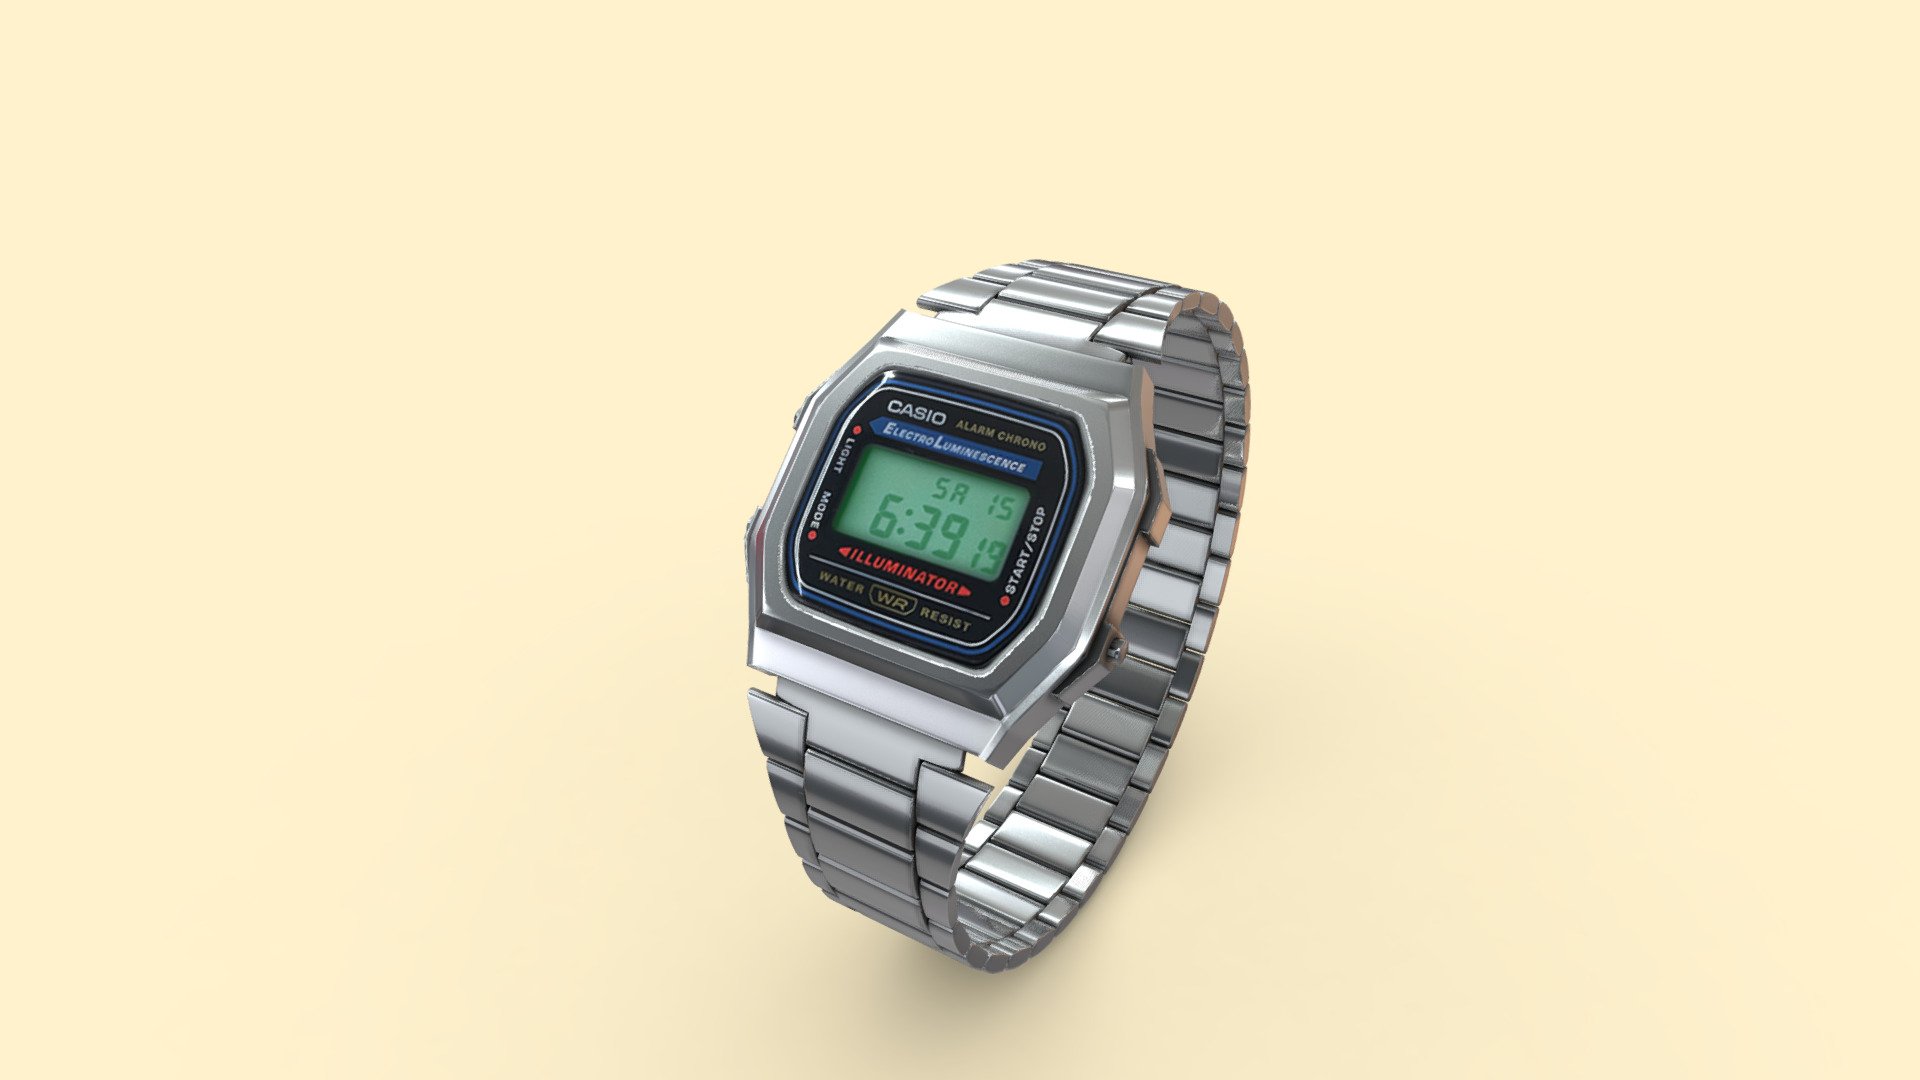 This model was just for the funsies, and I love doing anything hard surface related especially watches.

Made Using: 




Photoshop

Maya

Substance Painter
 - Casio - Alarm Chrono Digital Watch - 3D model by Adam.White 3d model